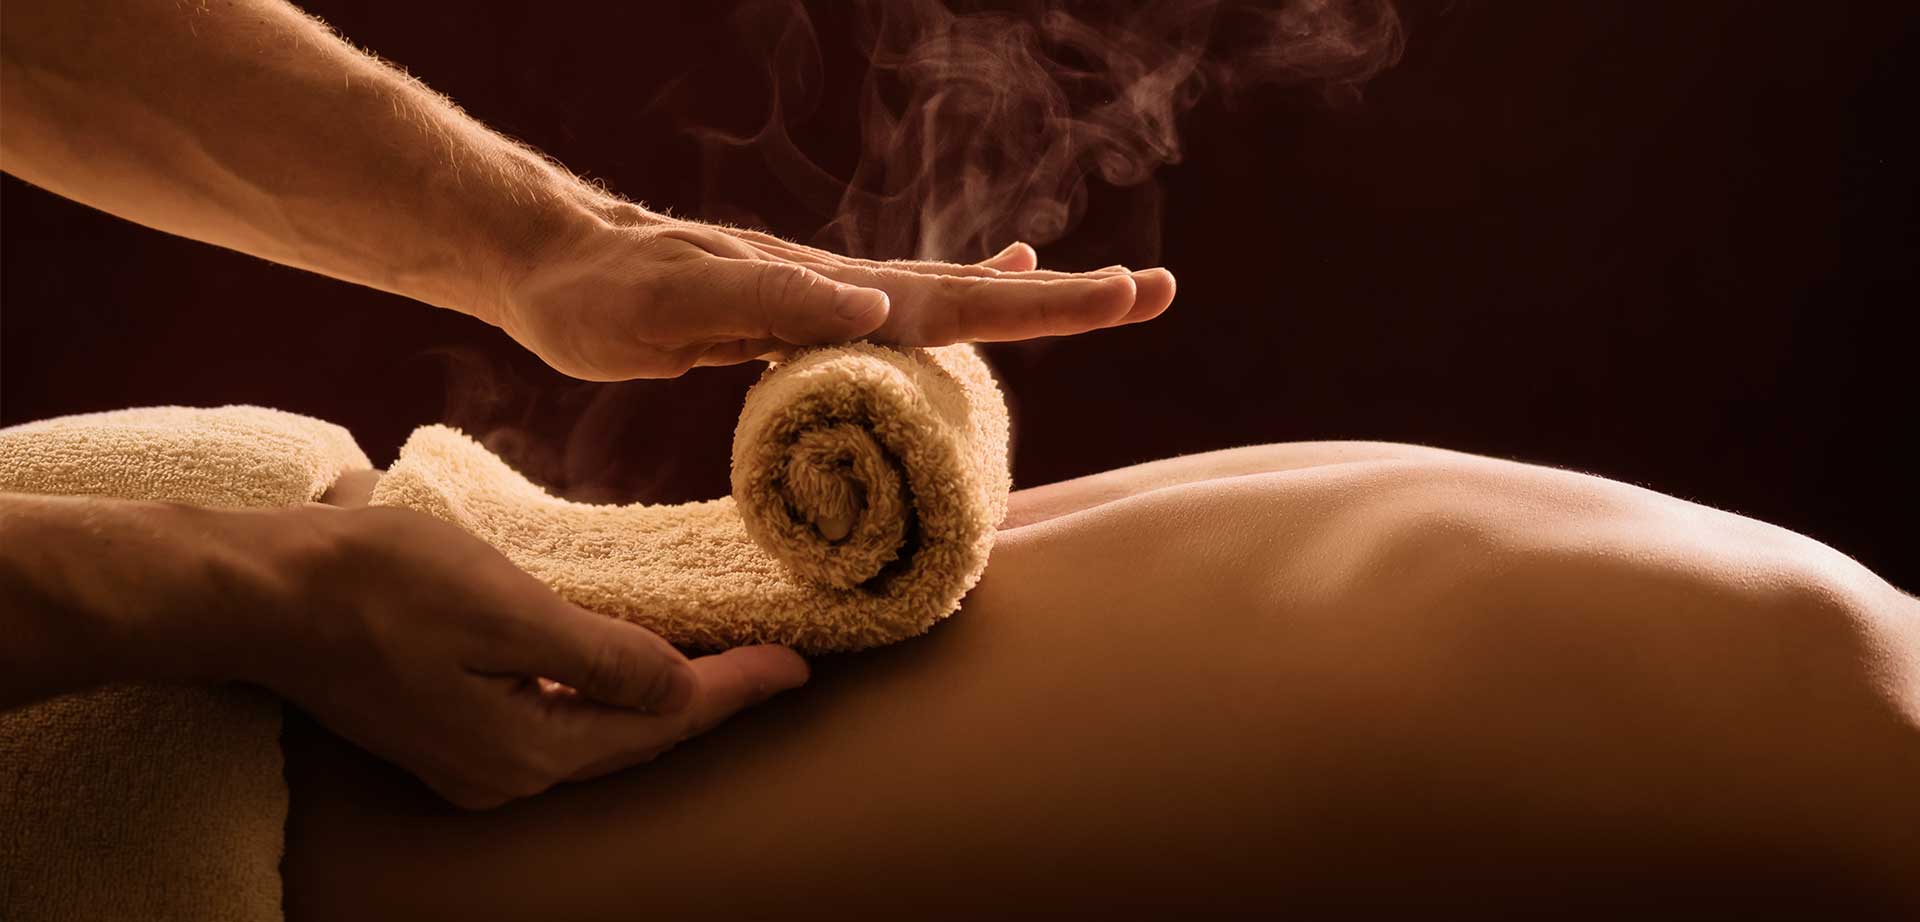 Burnaby’s Premier Registered Massage Therapy (RMT) Massage & Acupuncture Clinic